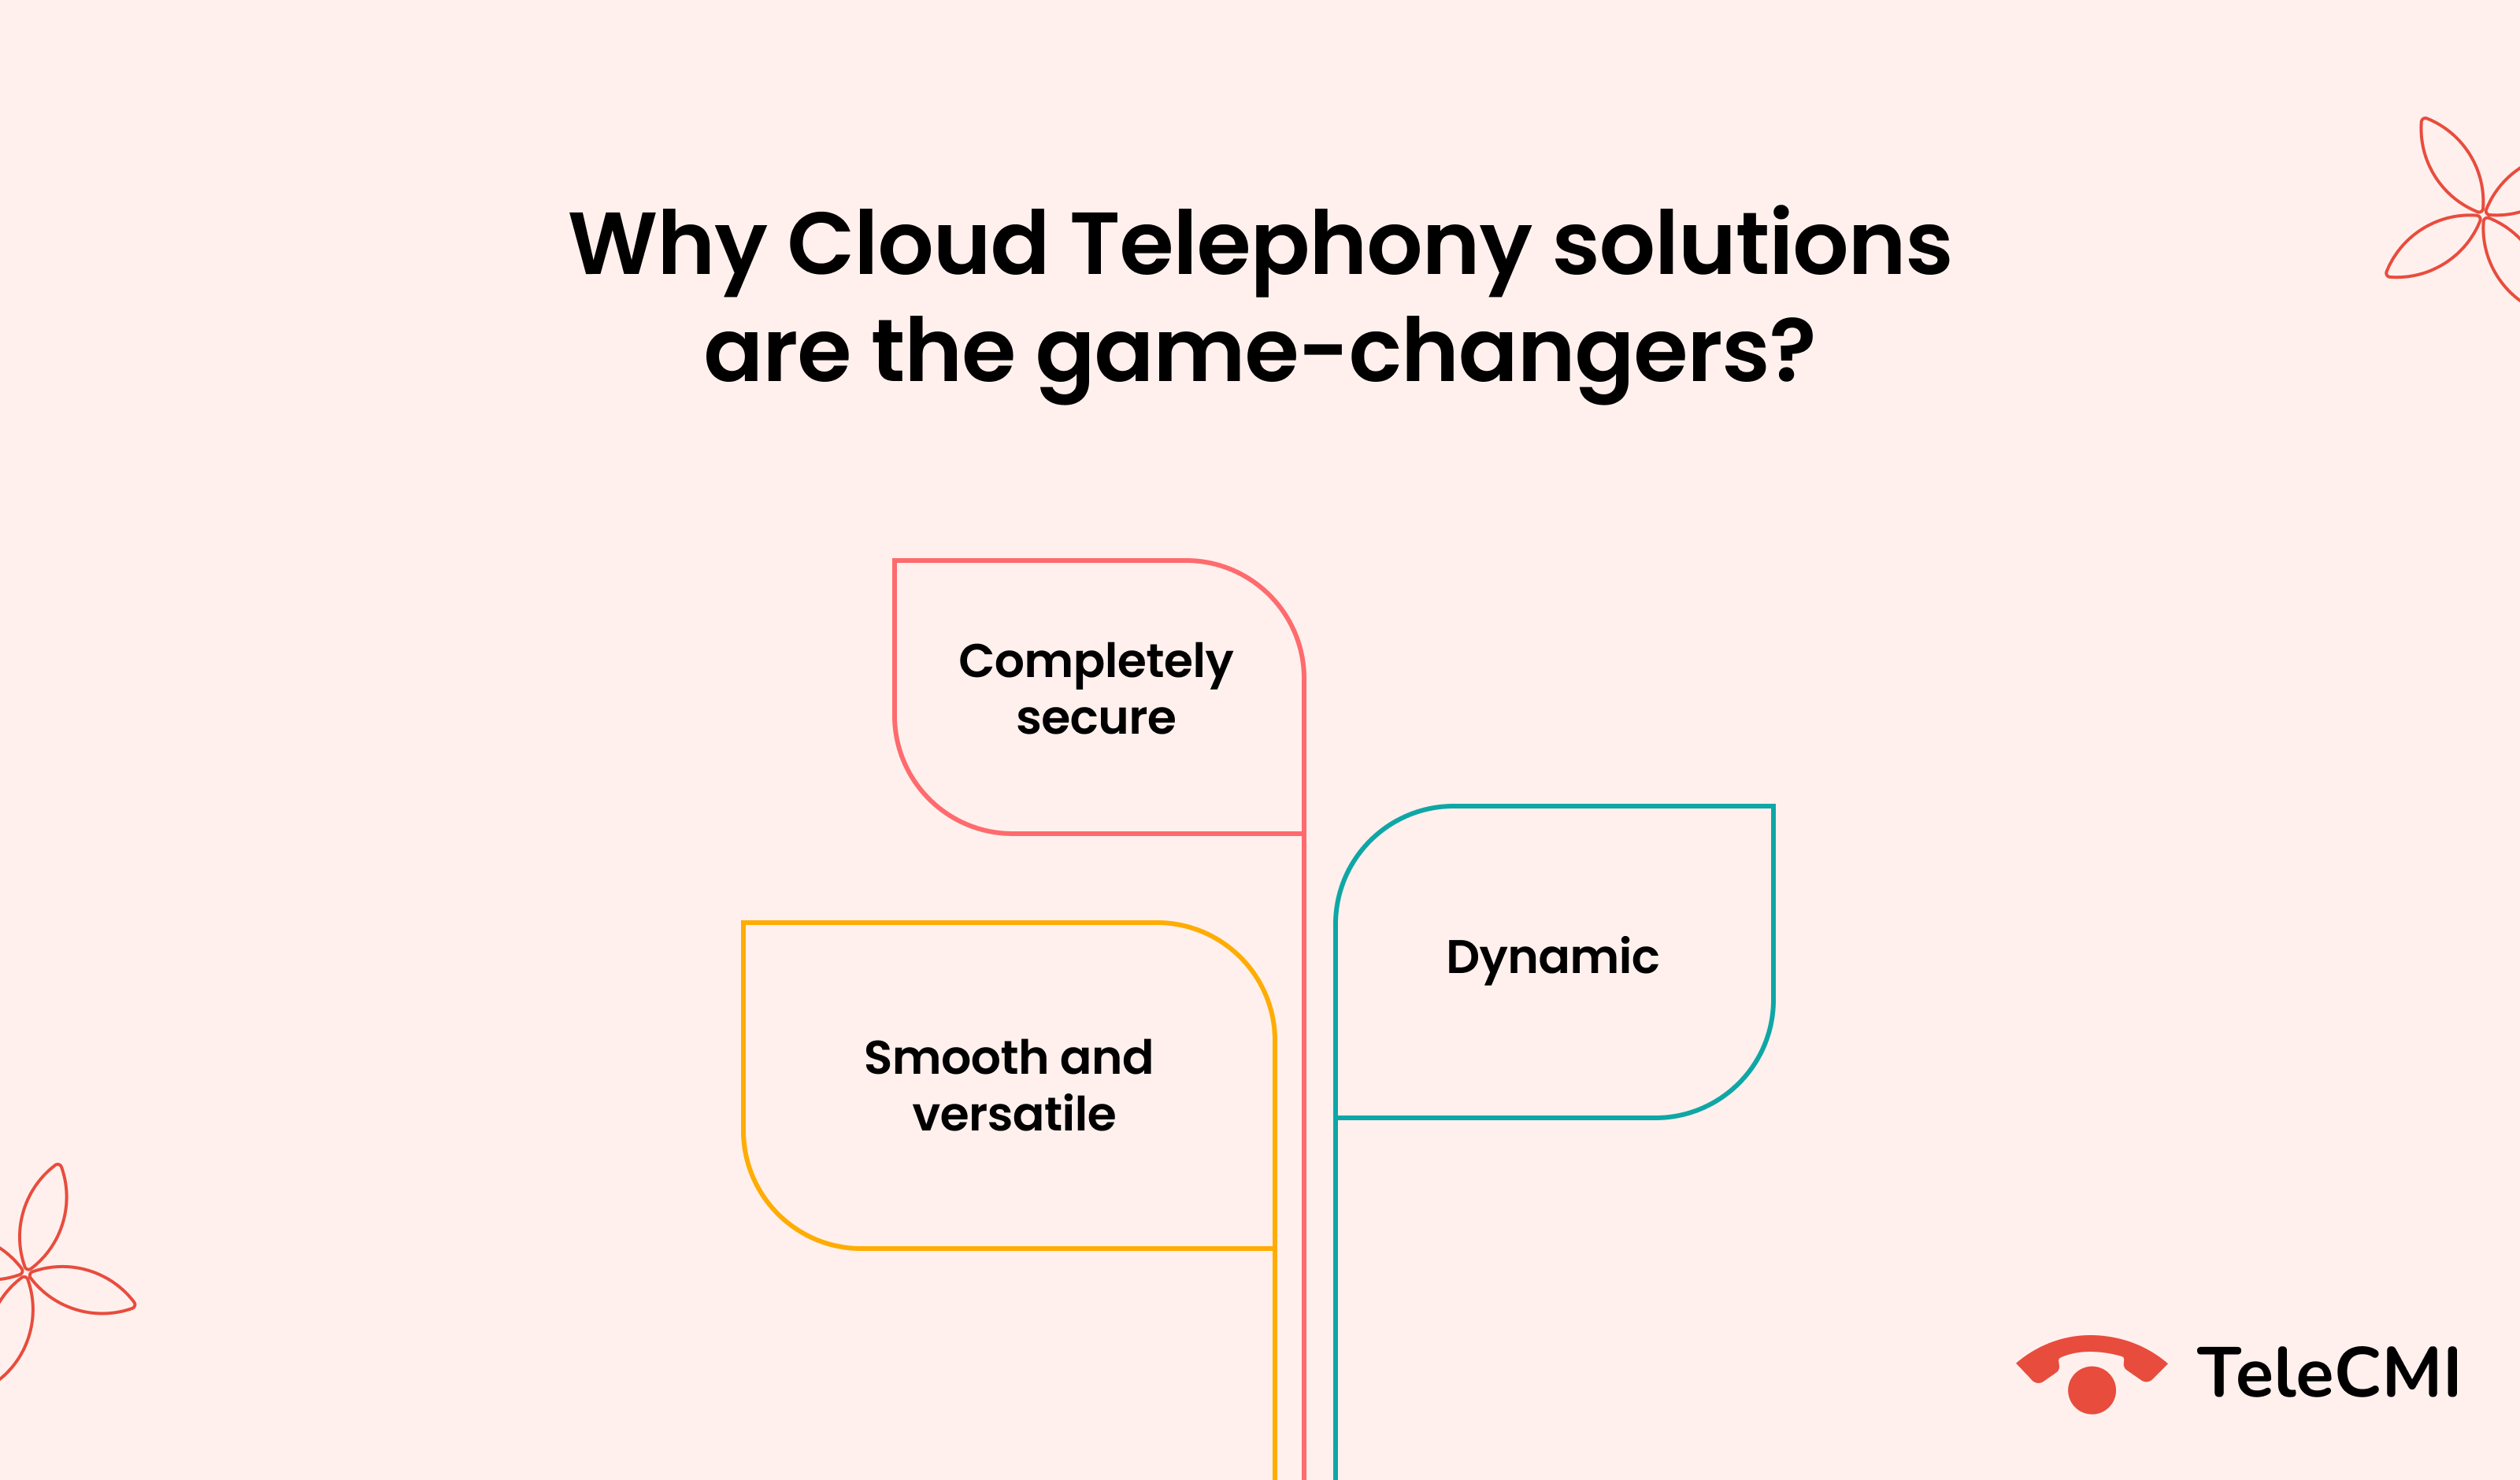 Cloud calling will offer the following benefits to businesses